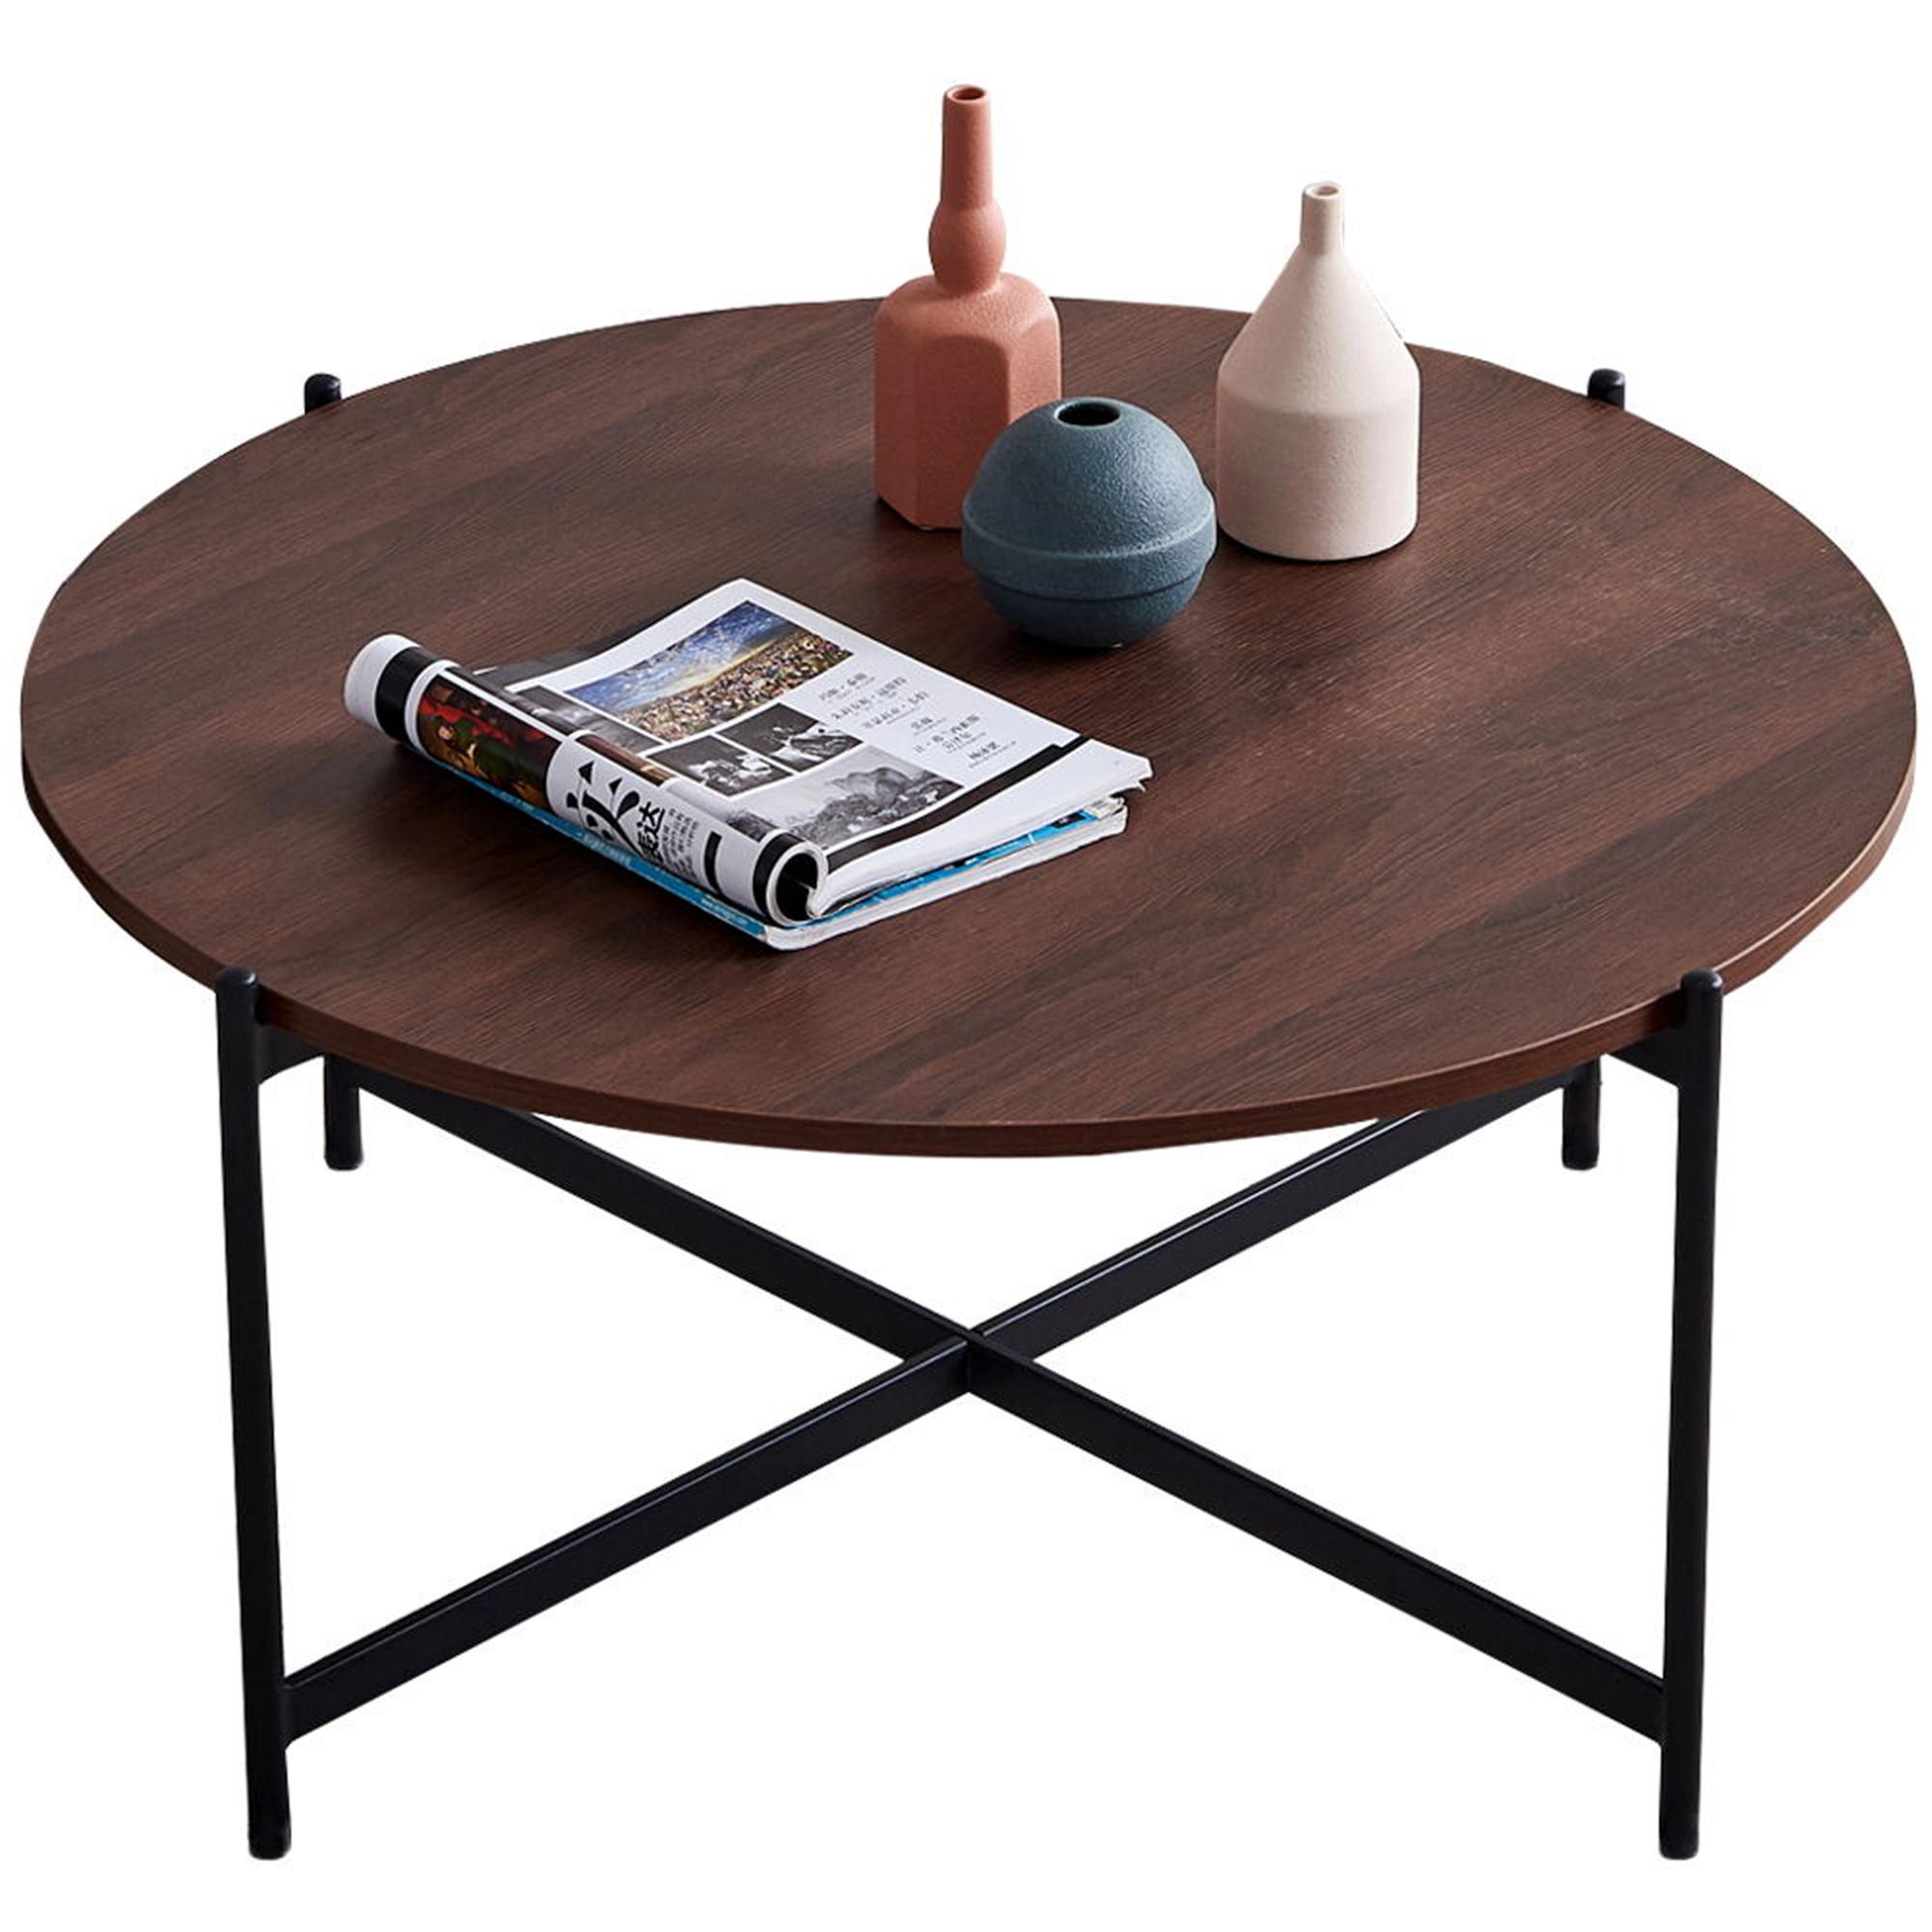 Modern Round Tea Table for Living Room, Circle Side Coffee Table, Waterproof Outdoor and Indoor End Tables, Nesting Black Metal Frame with Brown Color Wood Top for Living Room Office, 36x36x18 - image 2 of 7